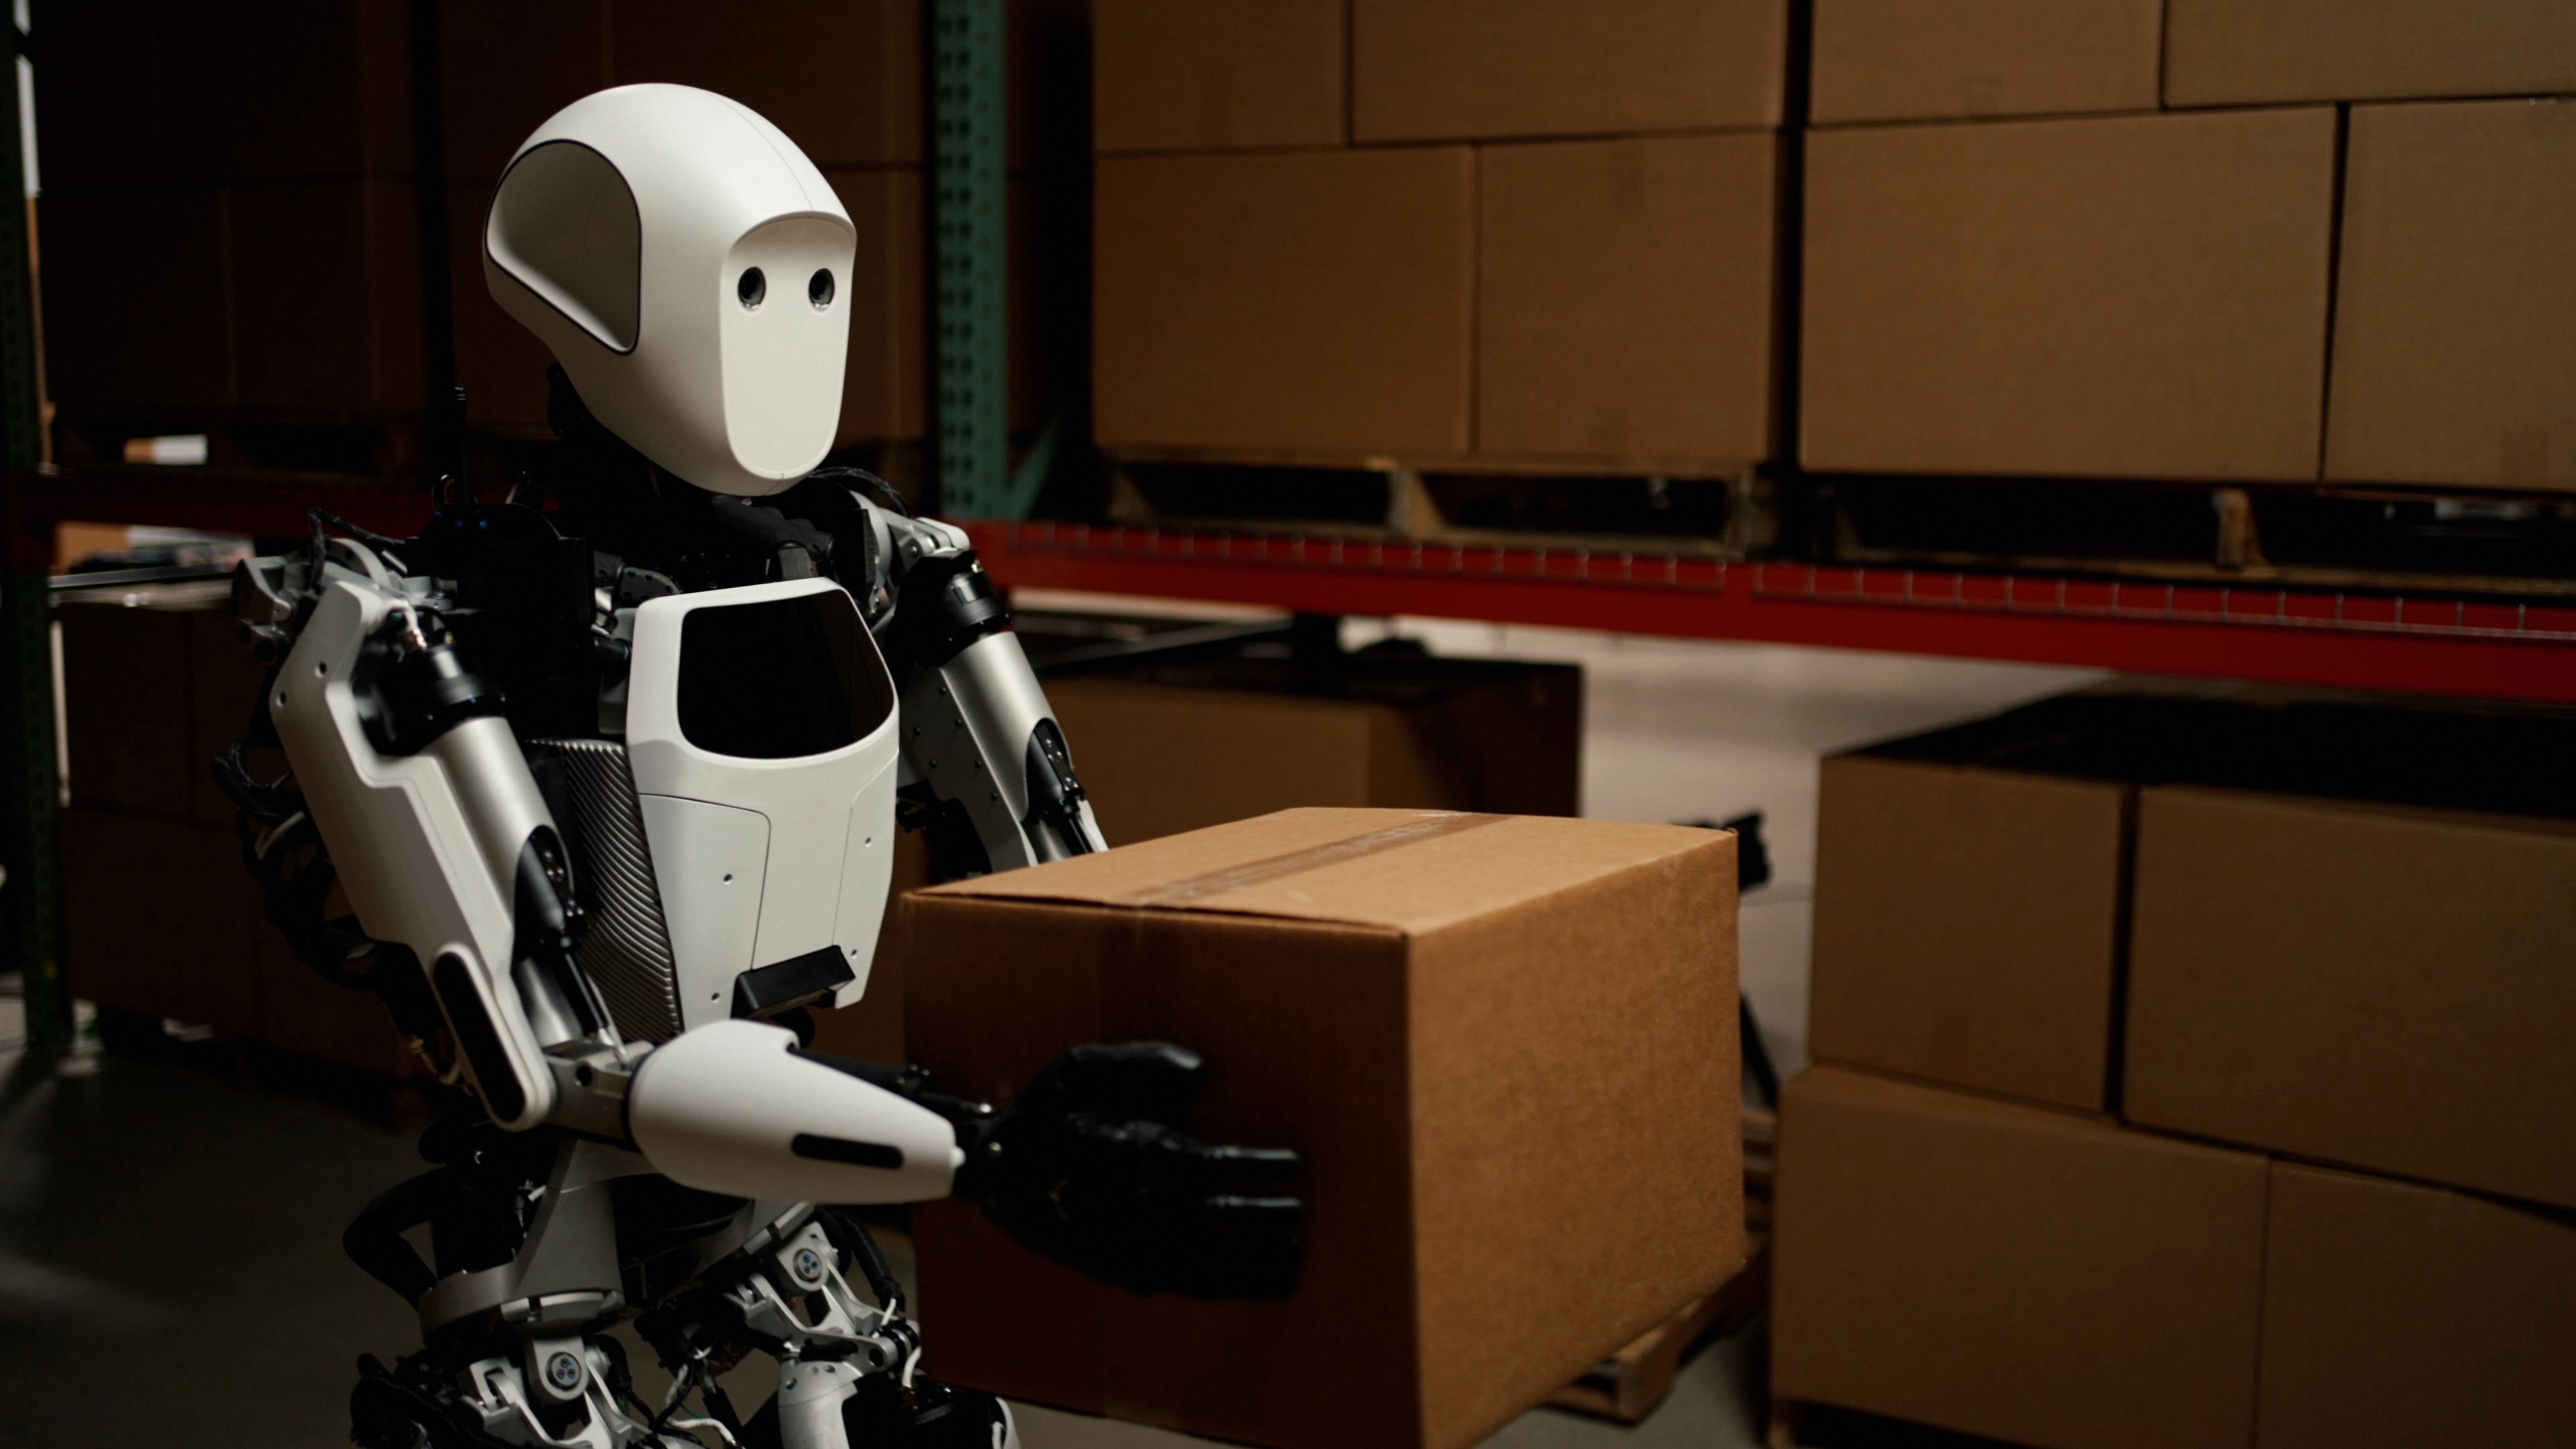 A humanoid robot carrying a box.